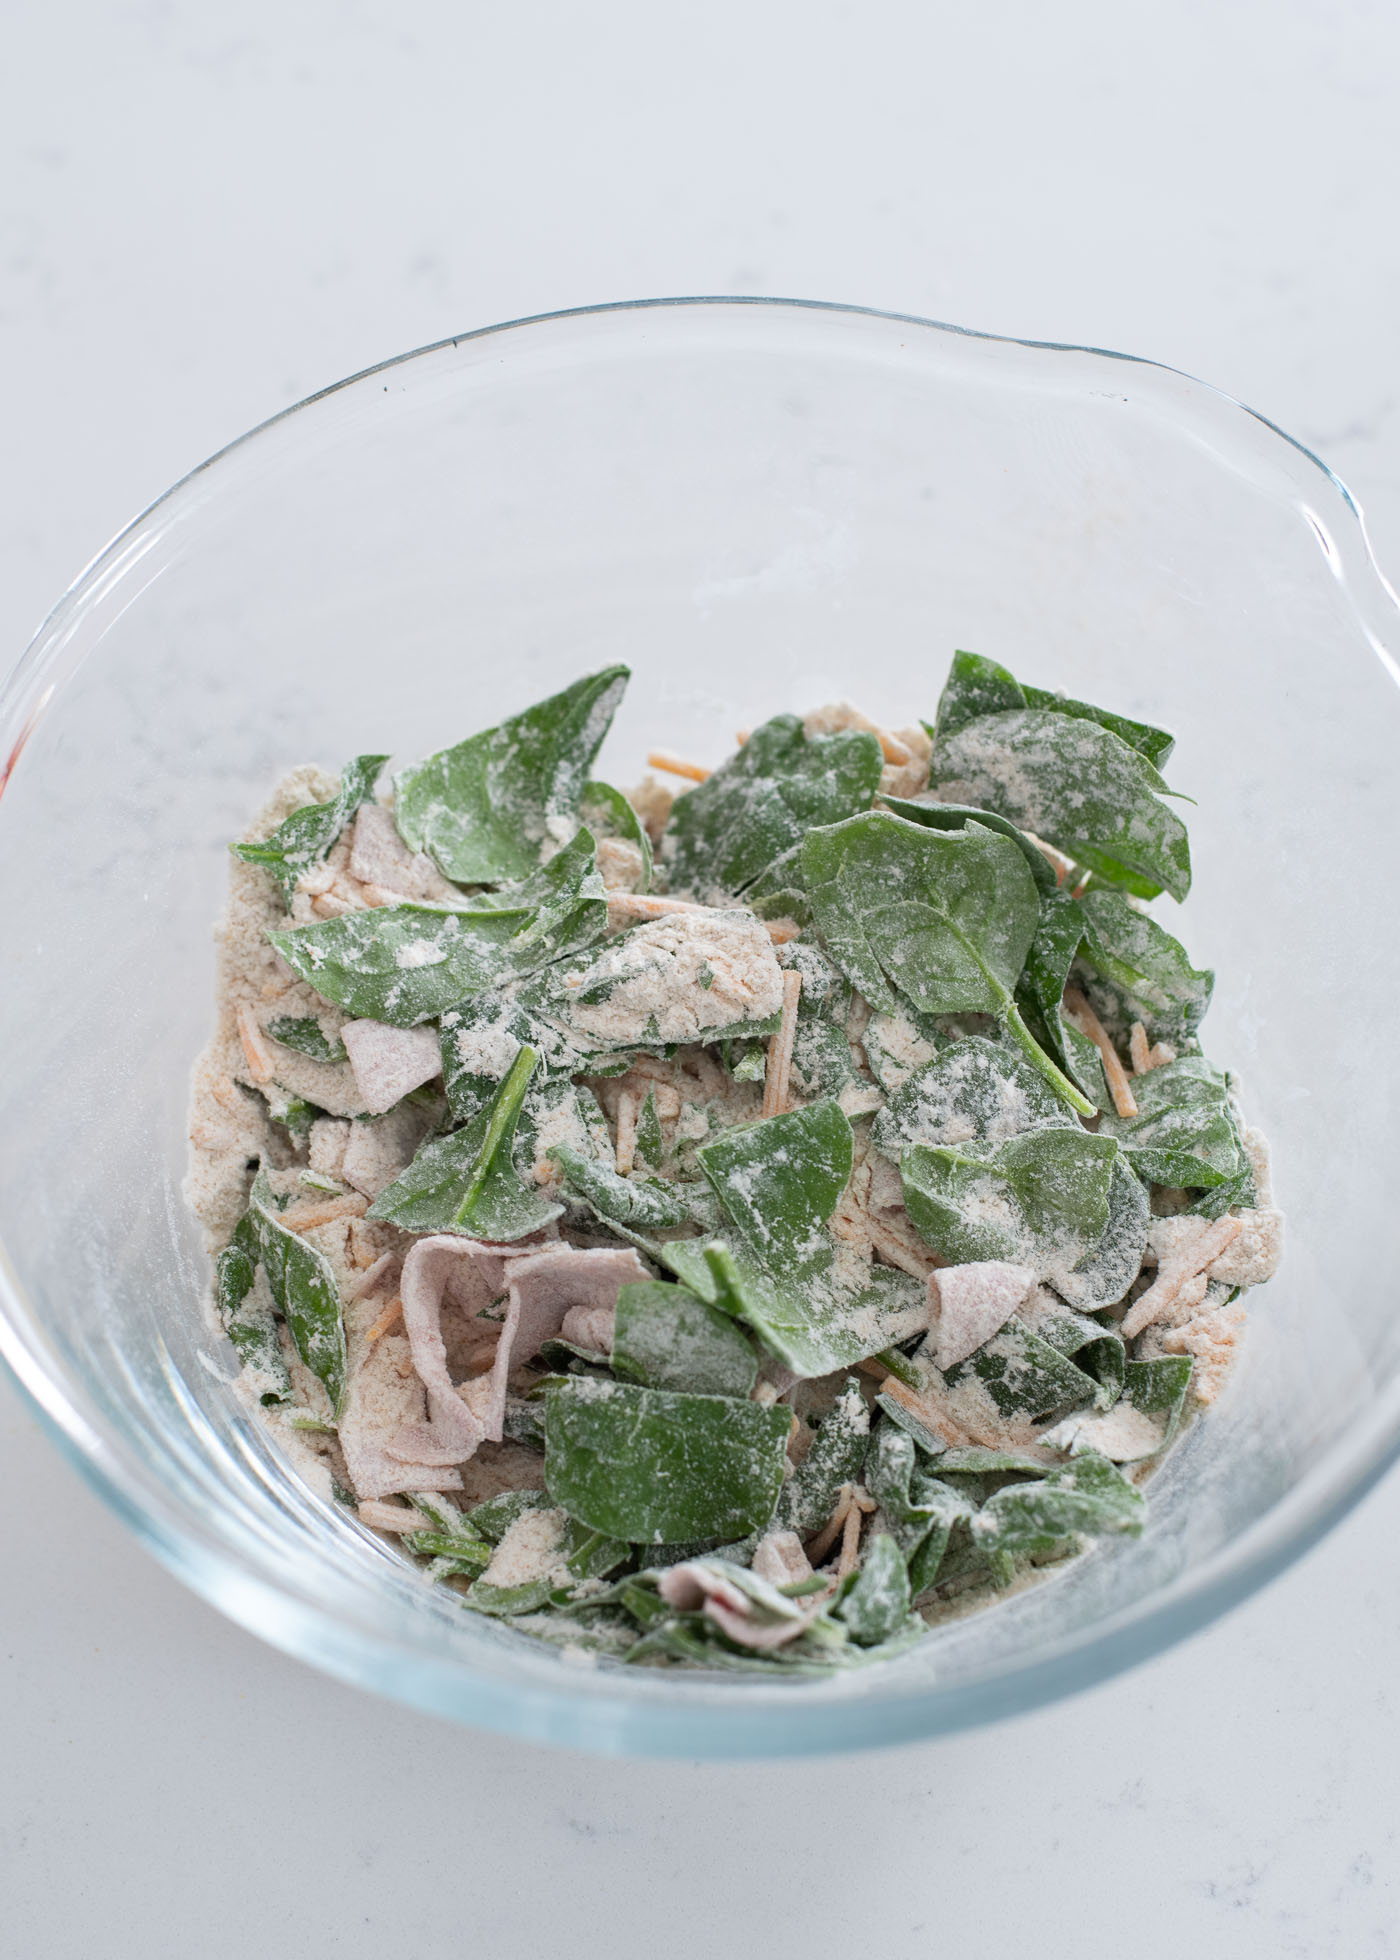 Dried flours and seasoning are added to the spinach, ham and cheese mixture.